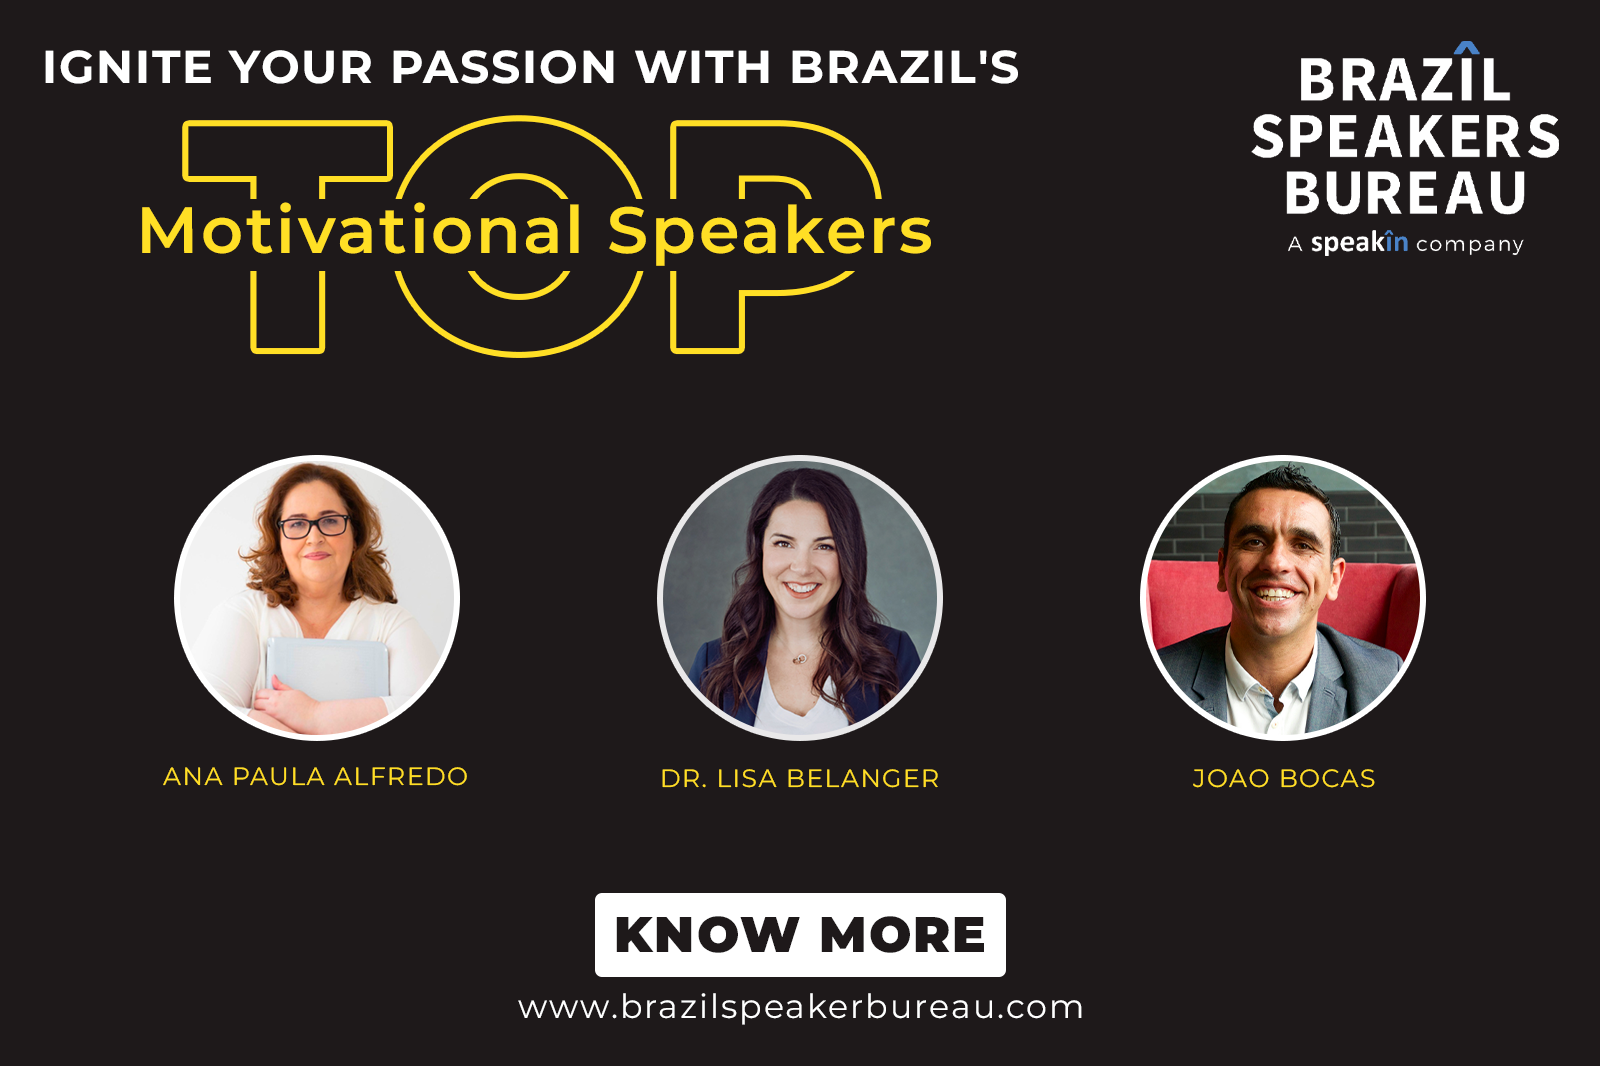 Ignite Your Passion with Brazil's Top Motivational Speakers